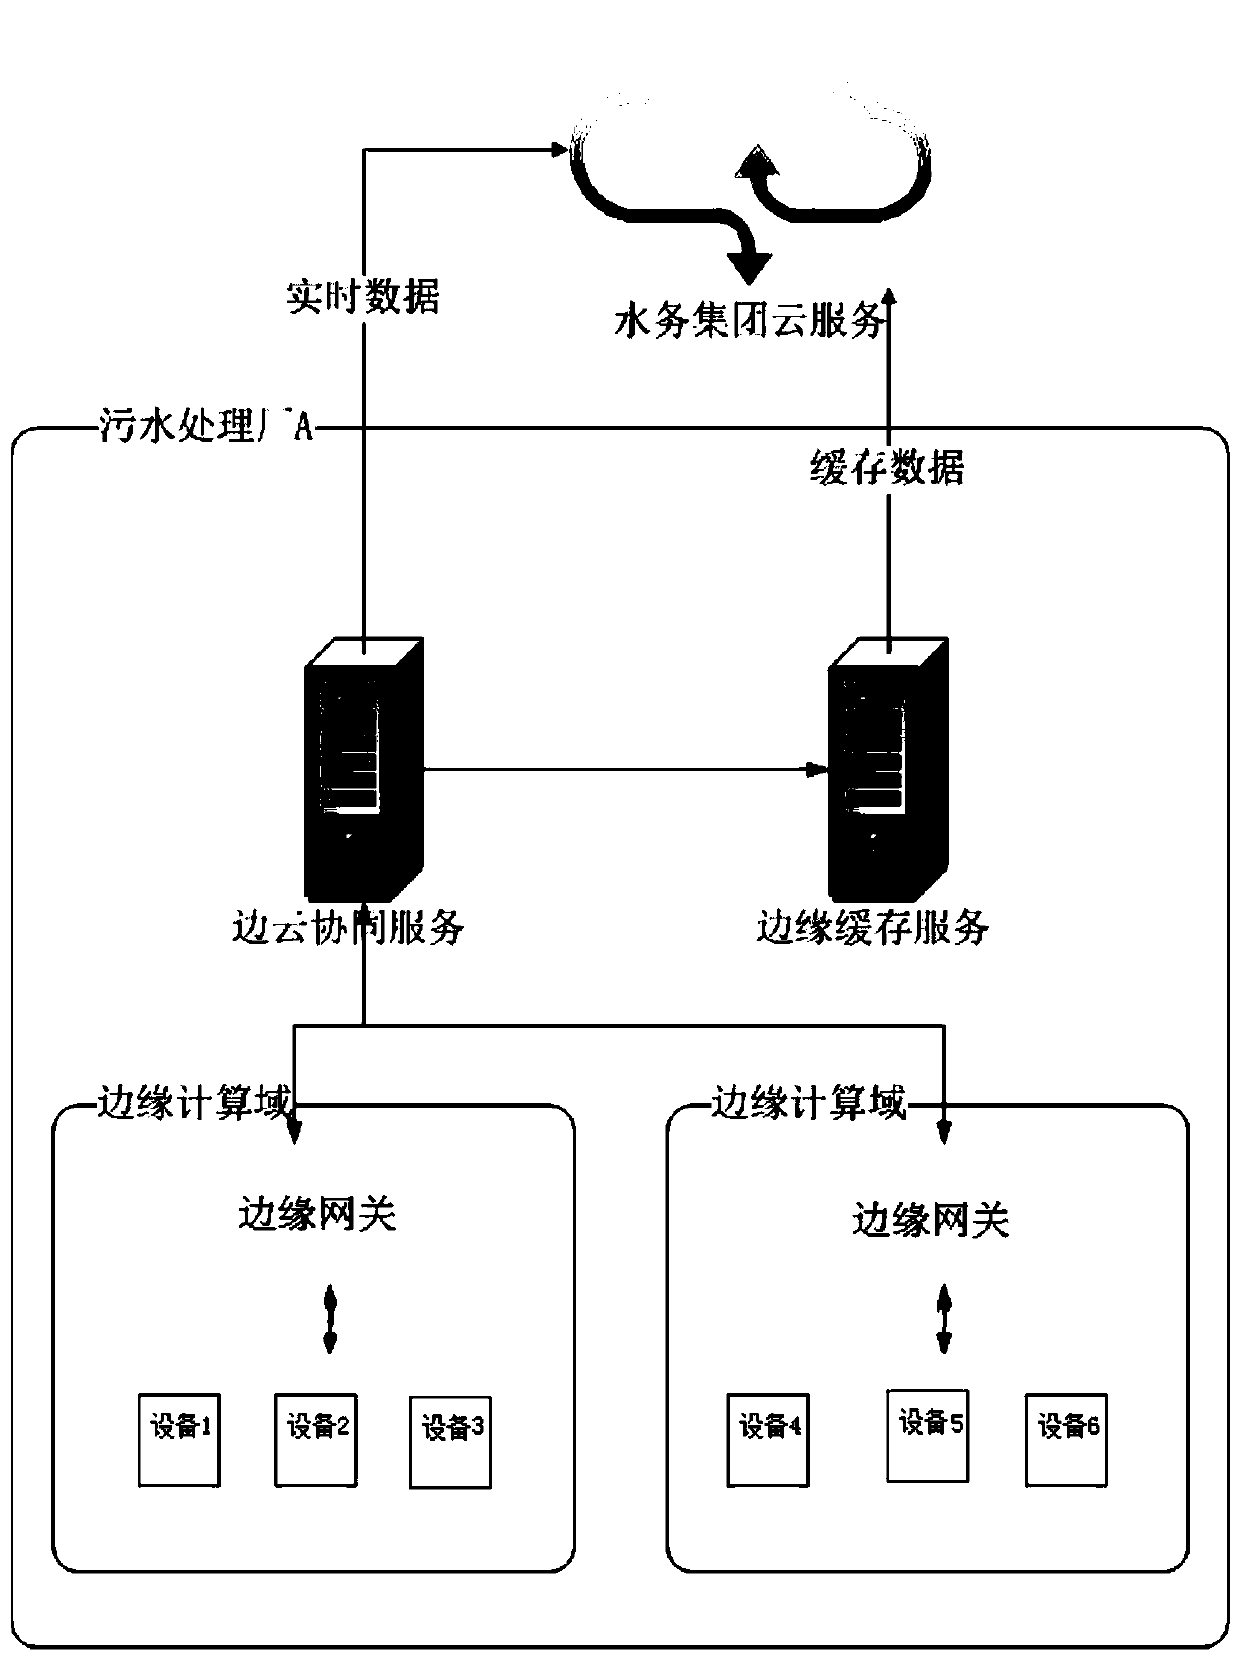 Edge cloud data collaboration method and system for sewage treatment Internet of Things application